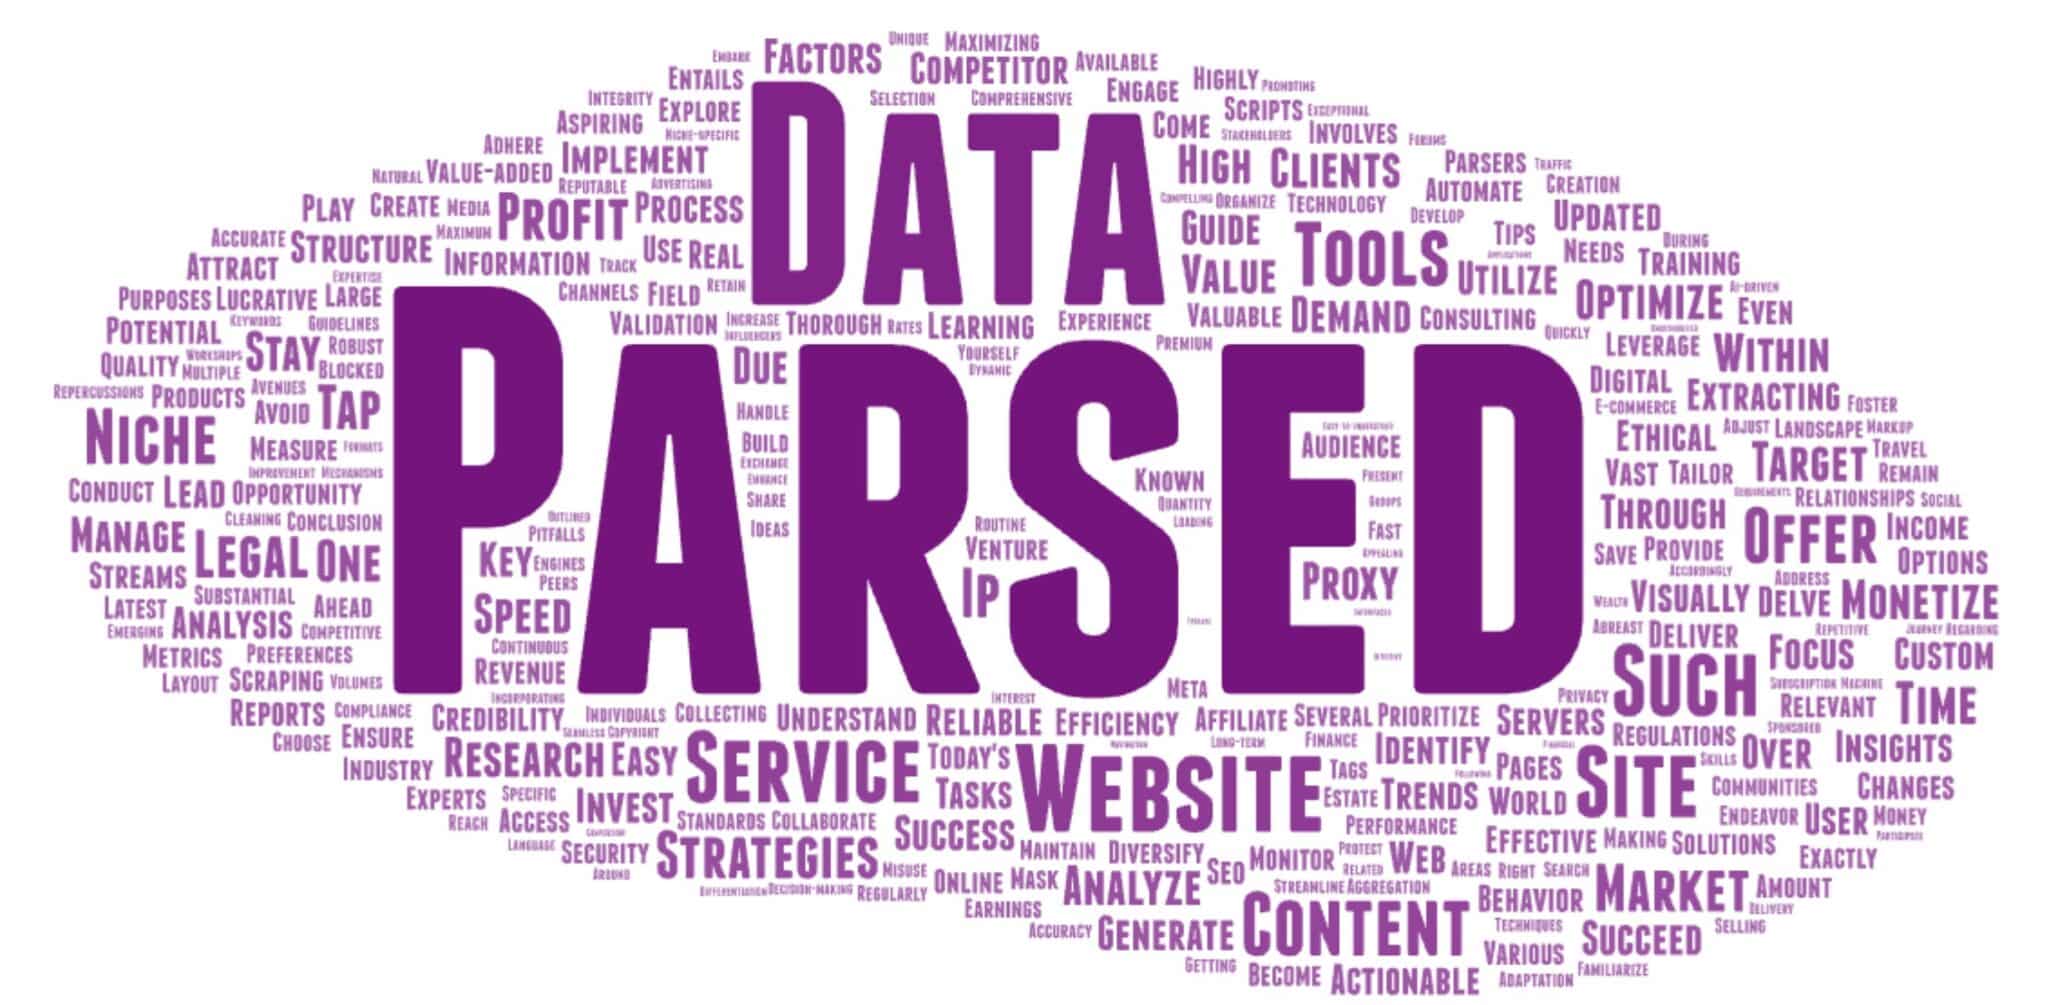 Can You Make Money by Parsing Sites? 30 Tips Revealed!